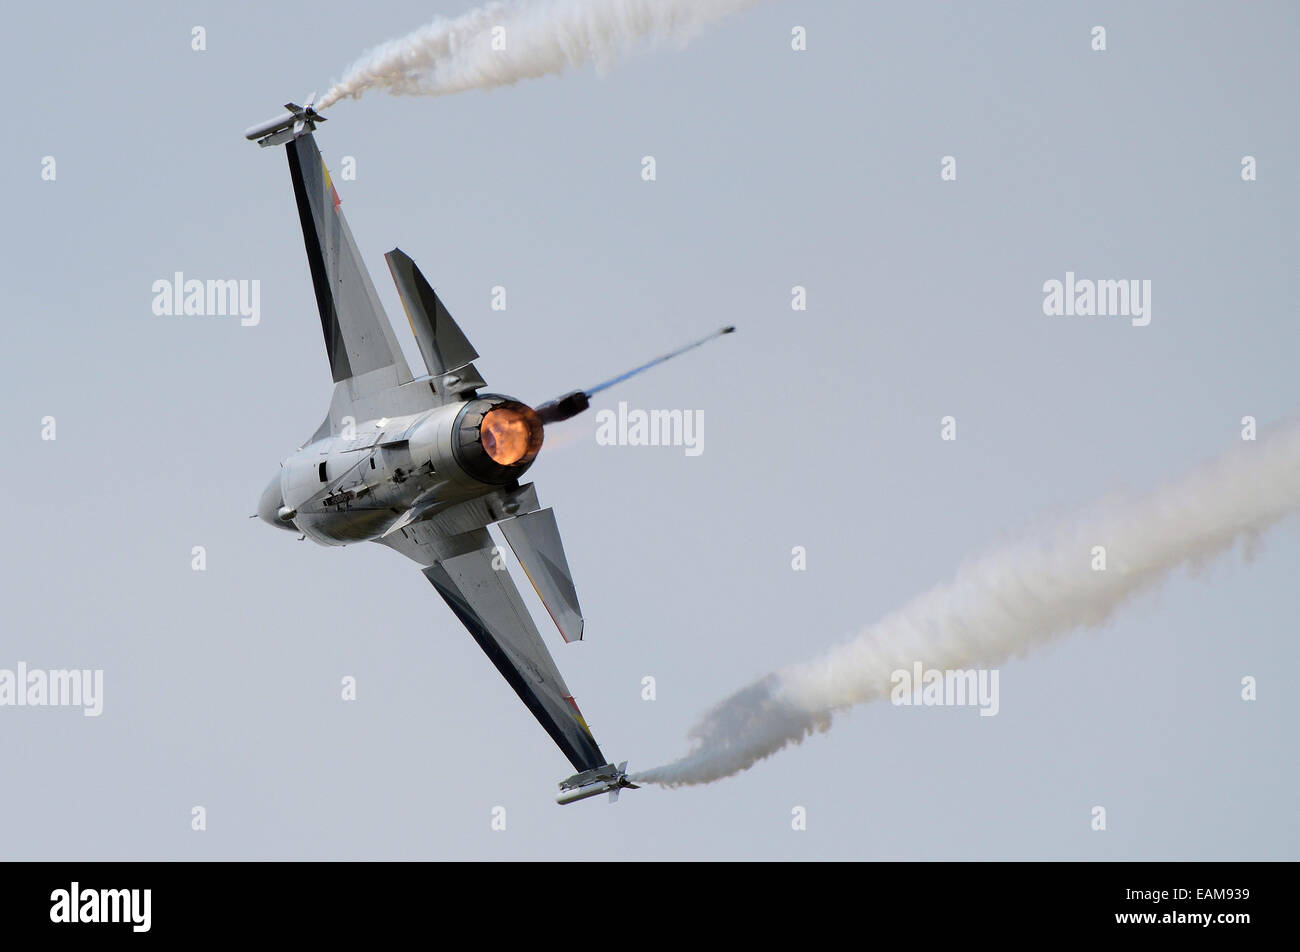 The F-16 Solo Display Team of the Belgian Air Force is based at Florennes Air Force base. Pulling hard with afterburner reheat and smoke Stock Photo